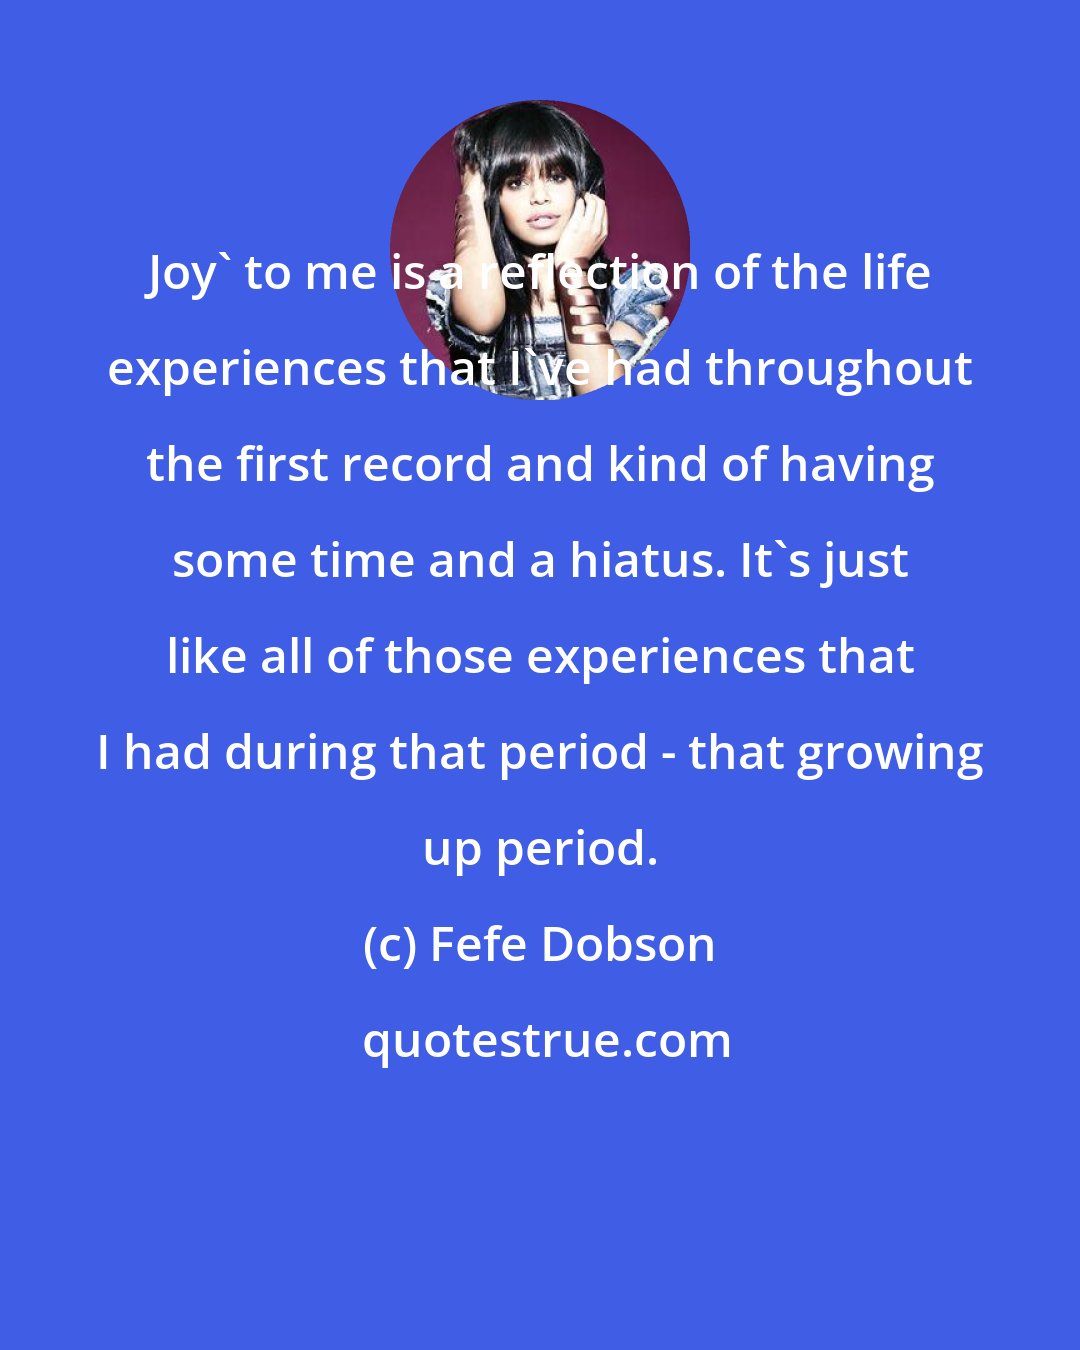 Fefe Dobson: Joy' to me is a reflection of the life experiences that I've had throughout the first record and kind of having some time and a hiatus. It's just like all of those experiences that I had during that period - that growing up period.